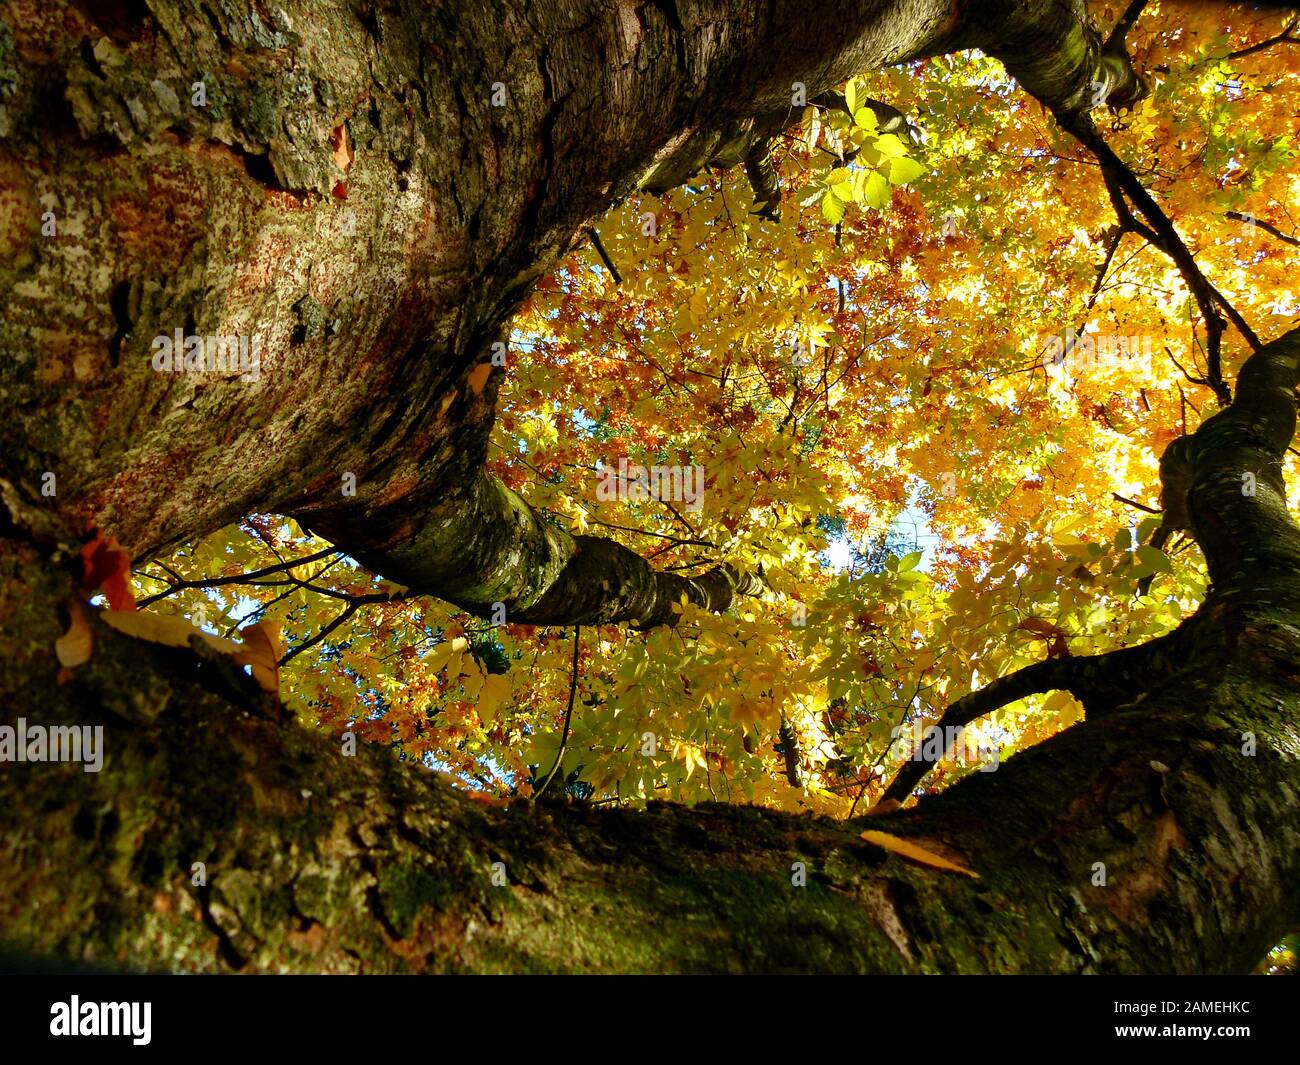 deciduous tree with yellow autumn leaves in full sun and very steep perspective, Stock Photo